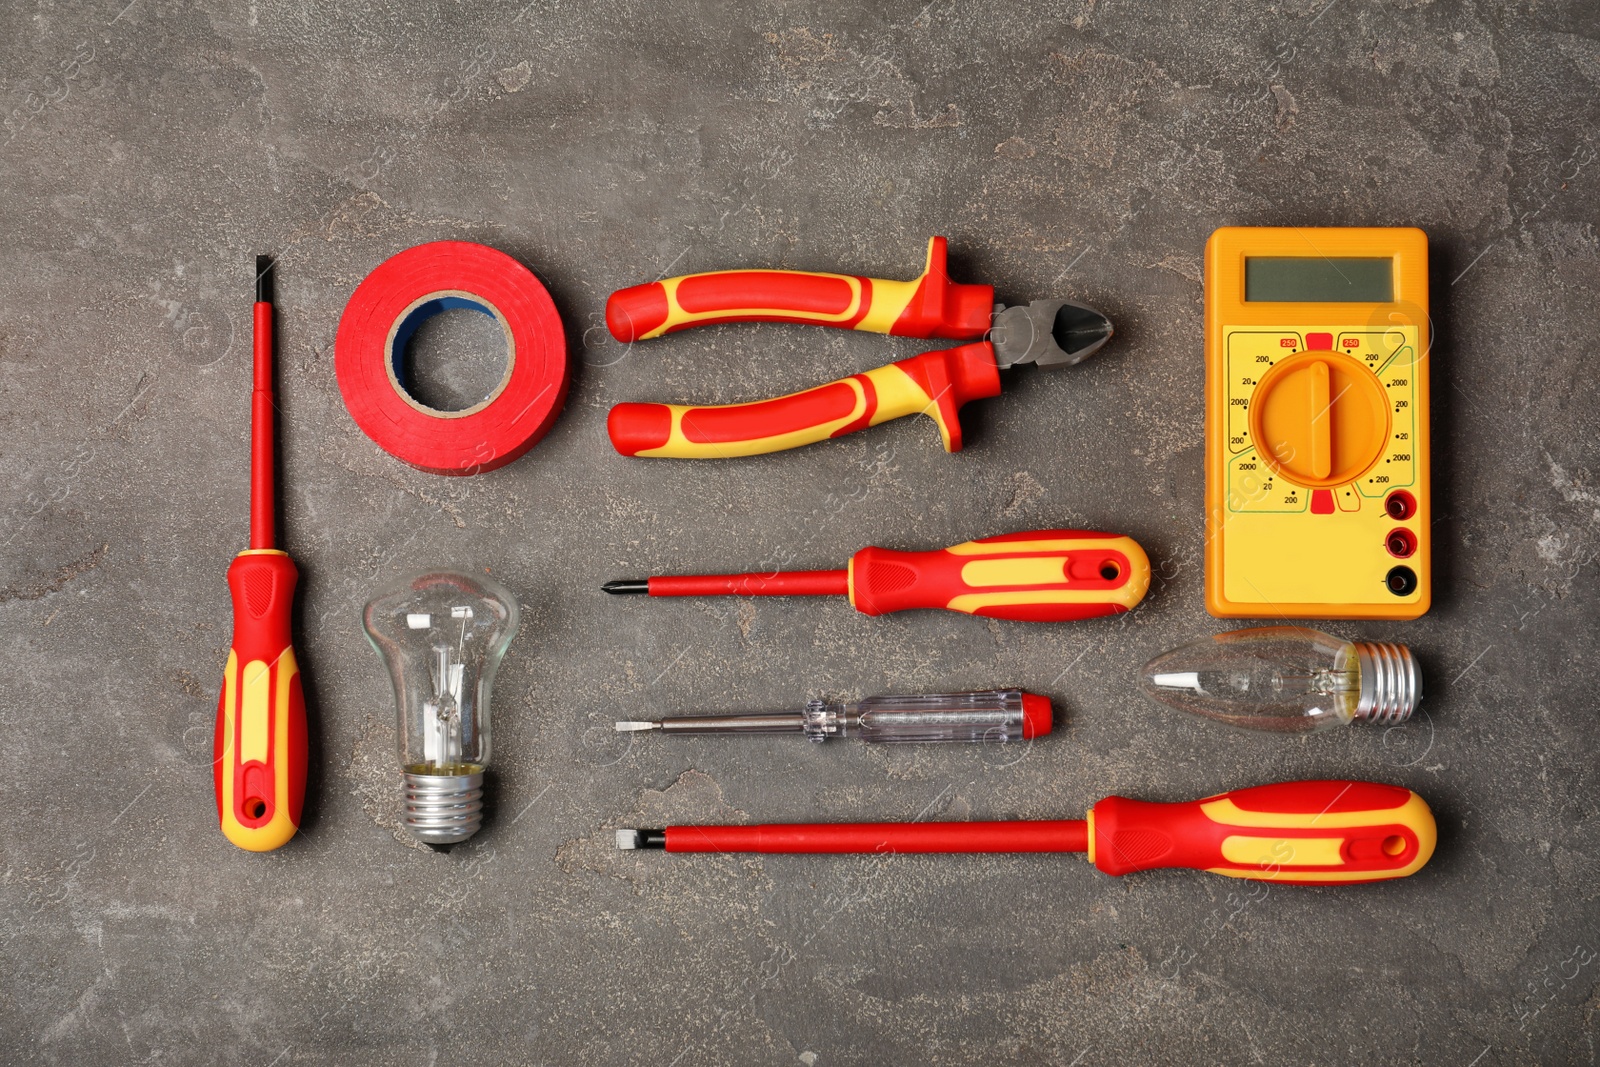 Photo of Flat lay composition with electrician's tools on gray background